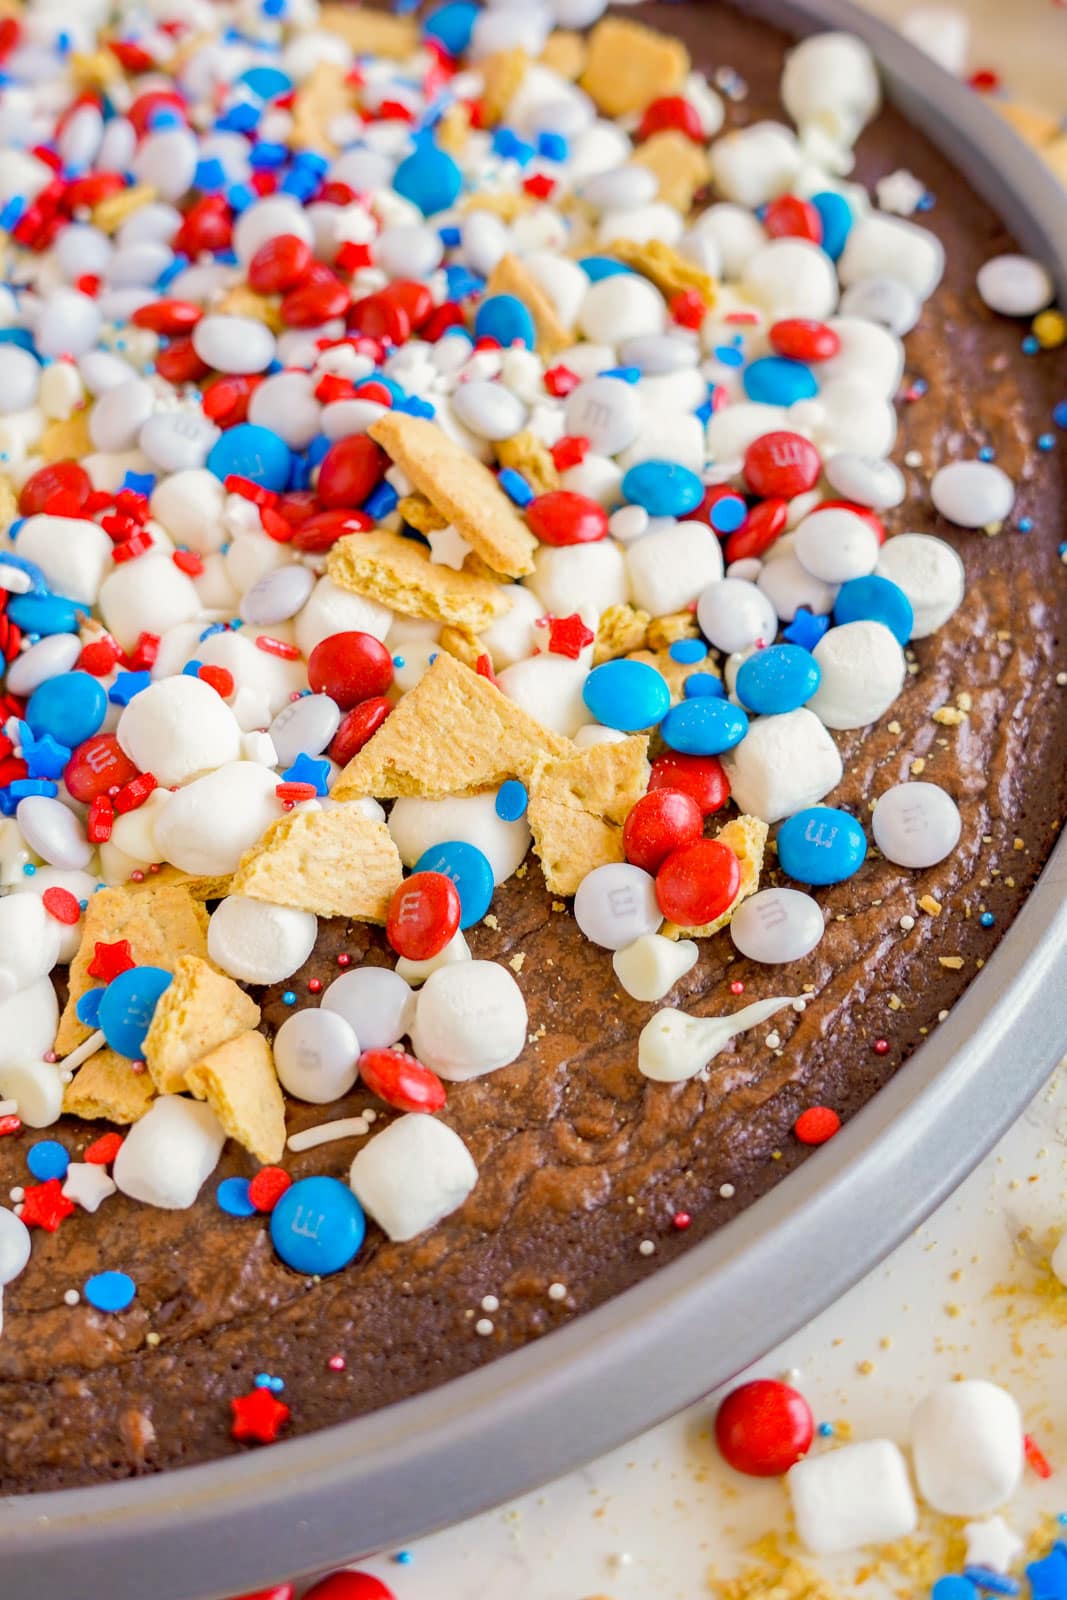 S'more pizza with patriotic candy toppings.